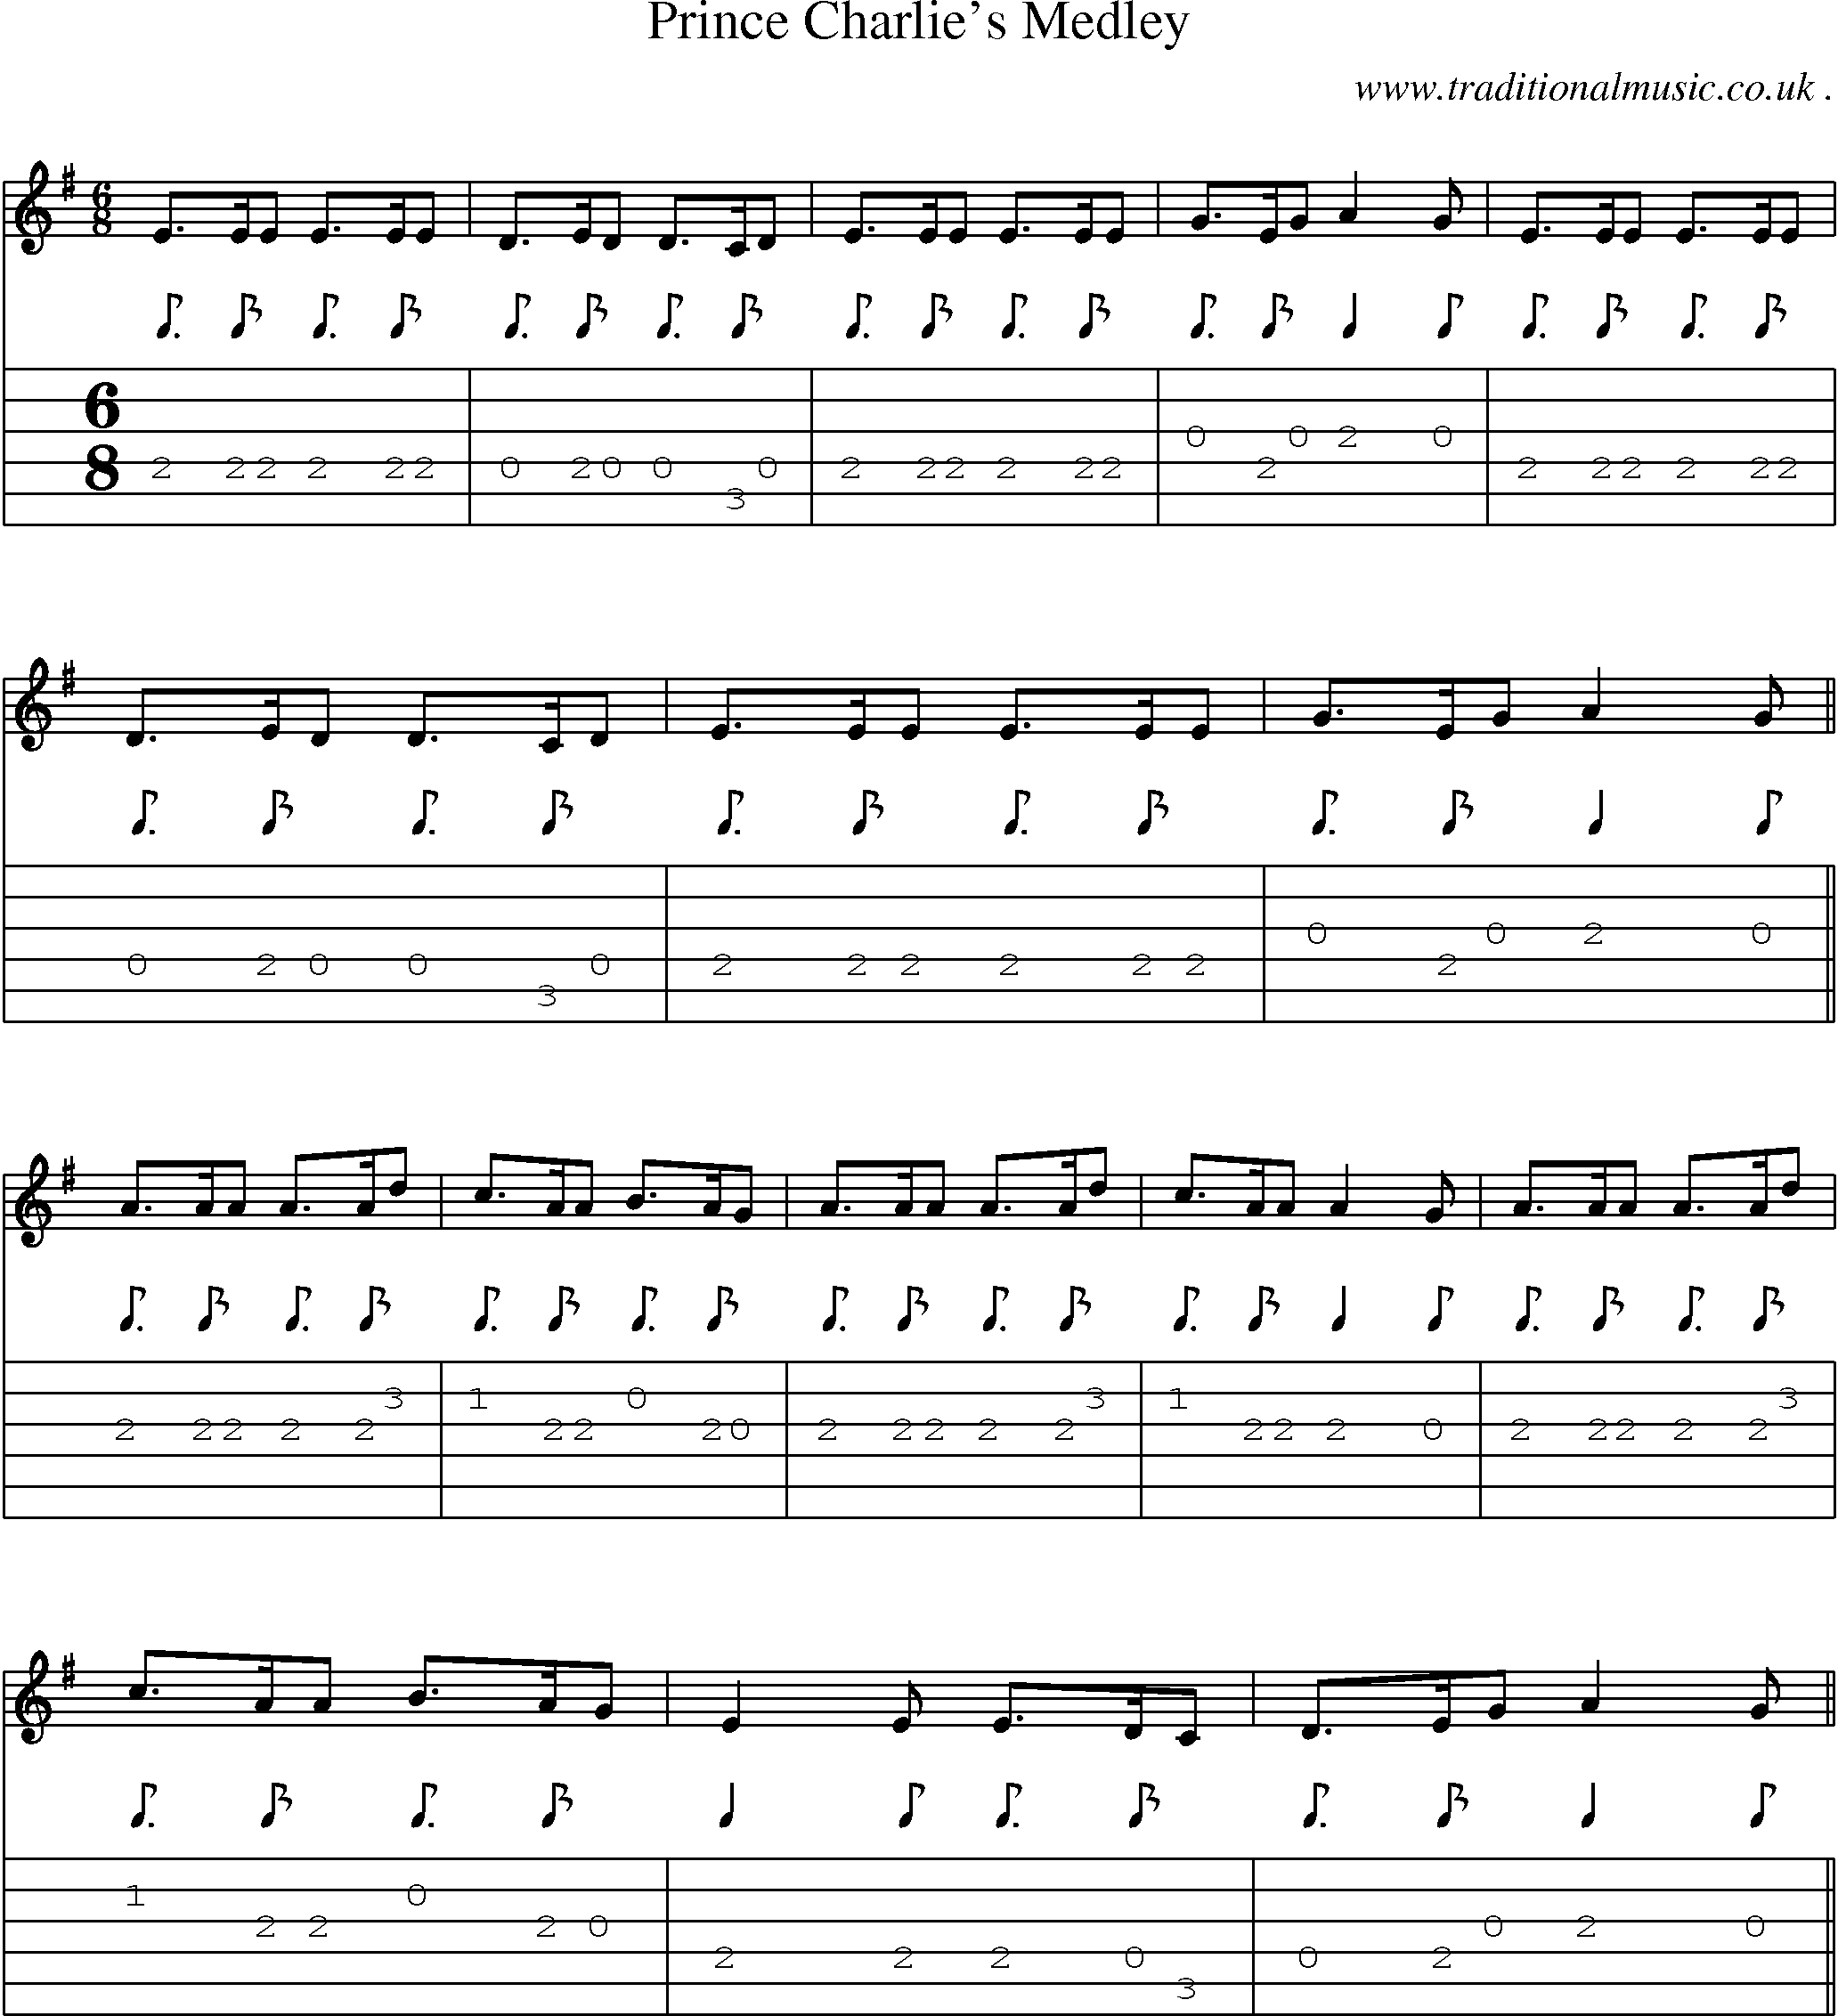 Sheet-music  score, Chords and Guitar Tabs for Prince Charlies Medley